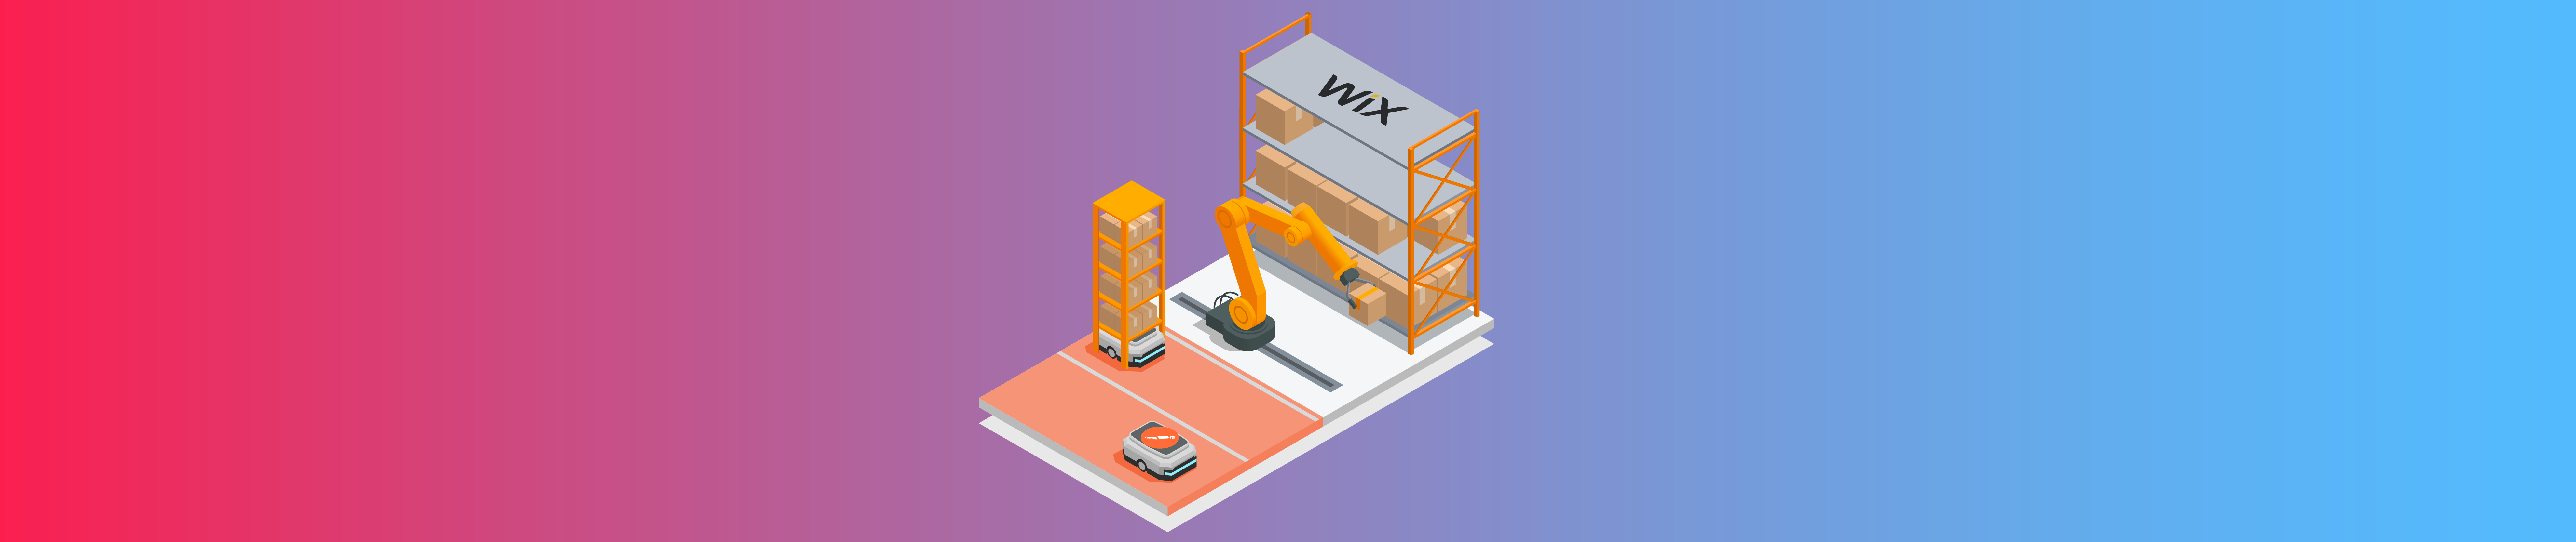 Wix API - How to increase or decrease inventory using Postman